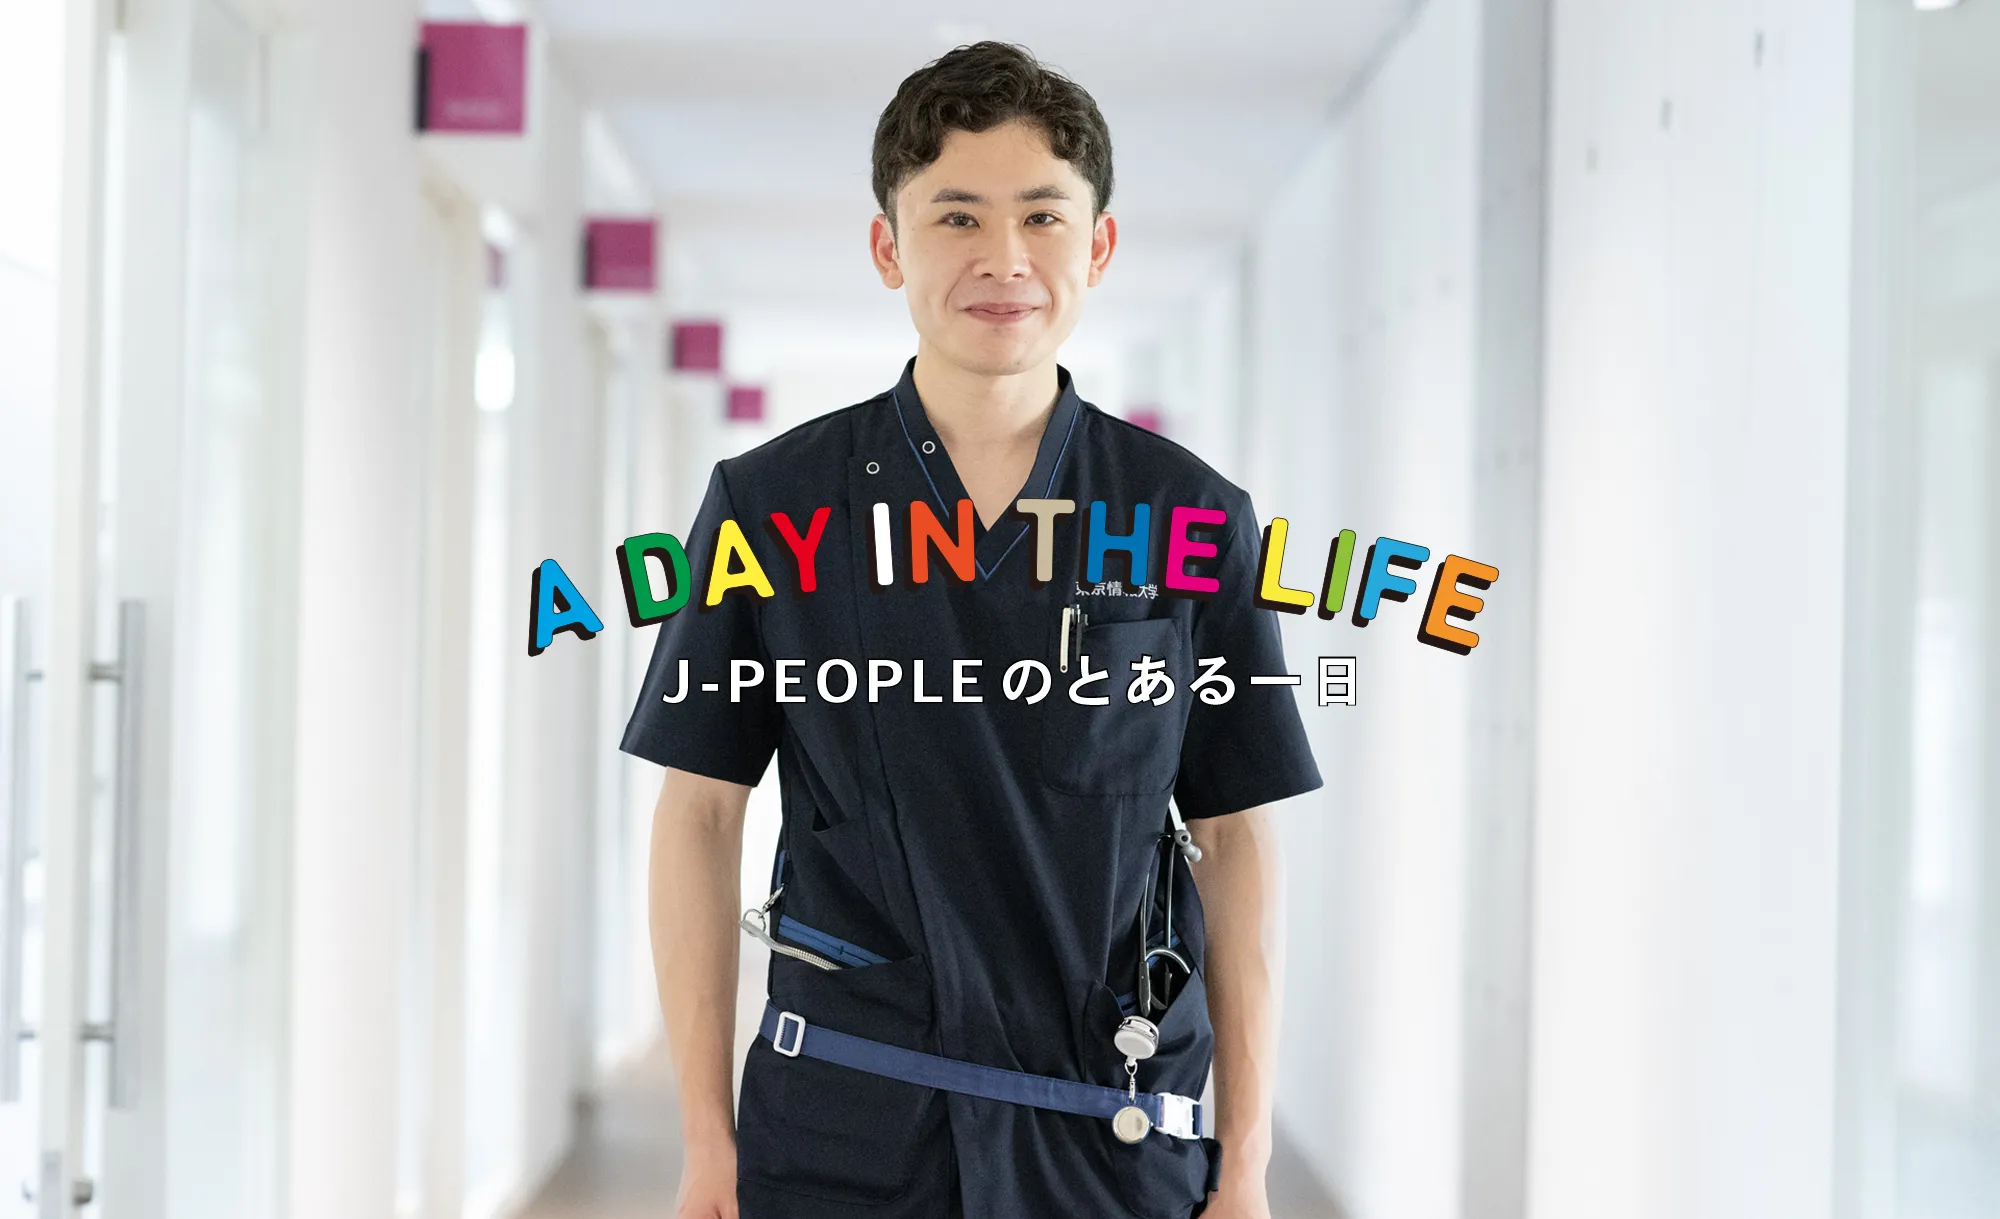 A DAY IN THE LIFE J-PEOPLEのとある一日